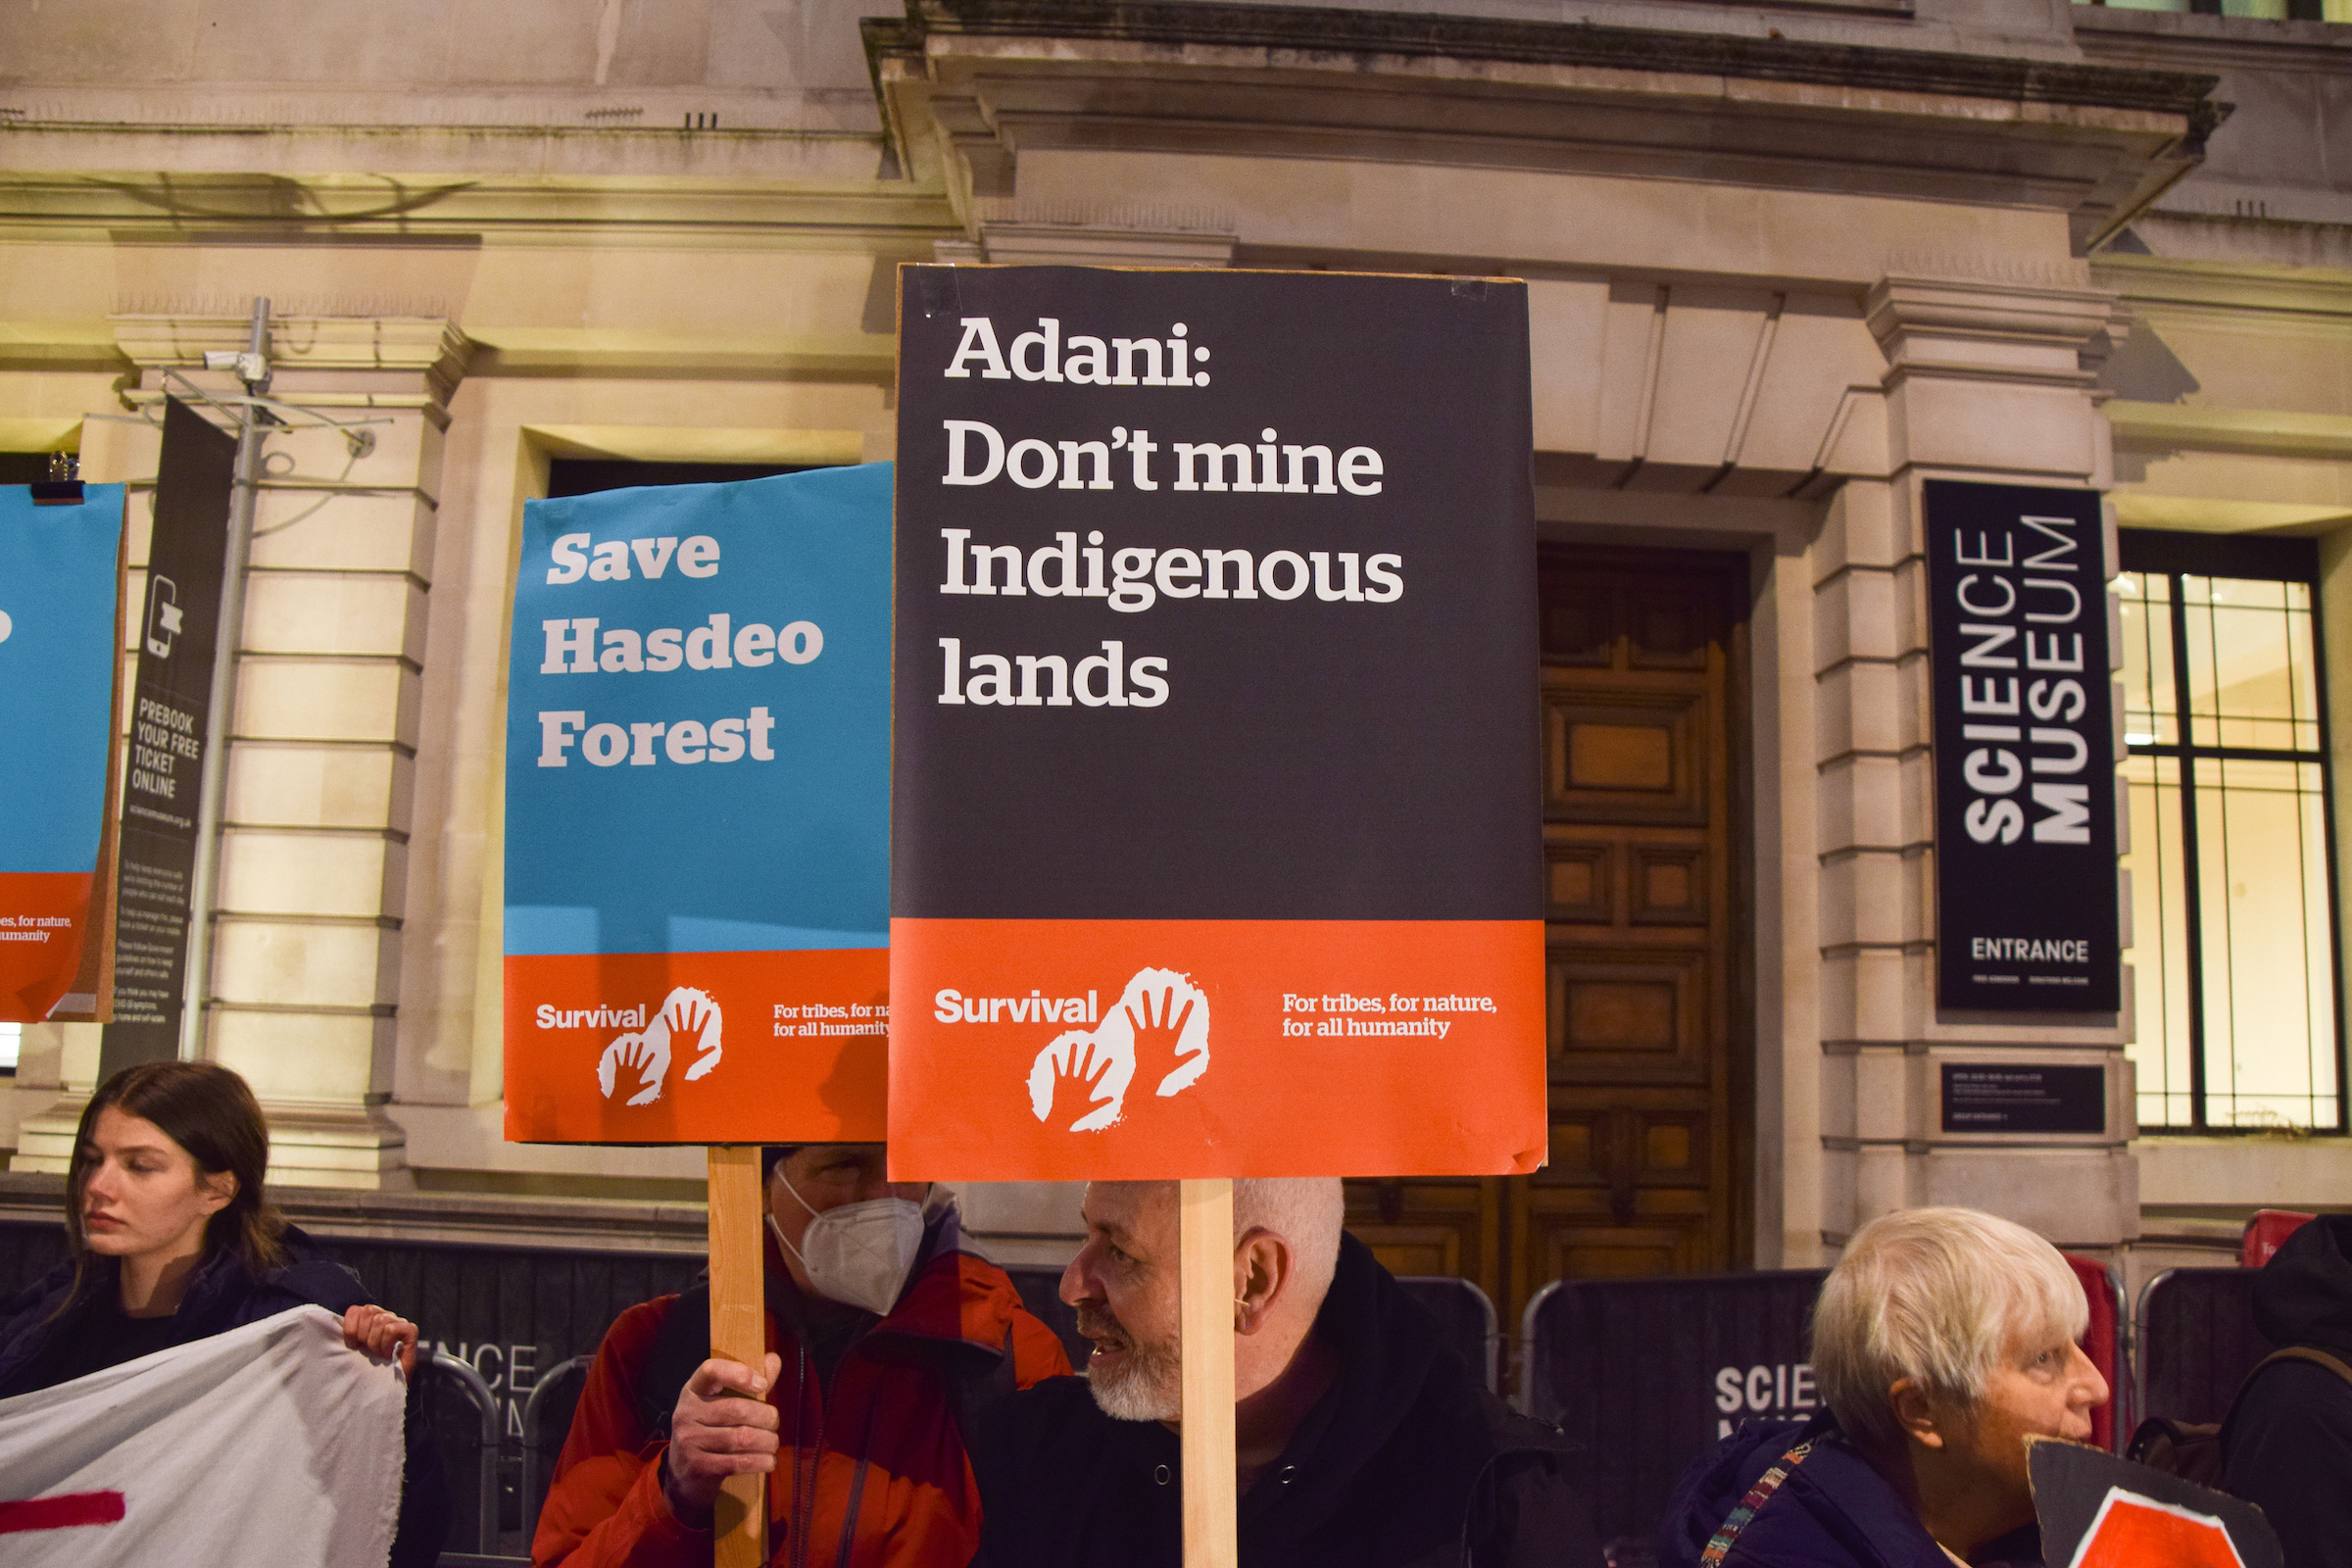 Demonstrators hold 'Save Hasdeo Forest' and 'Adani: Don't